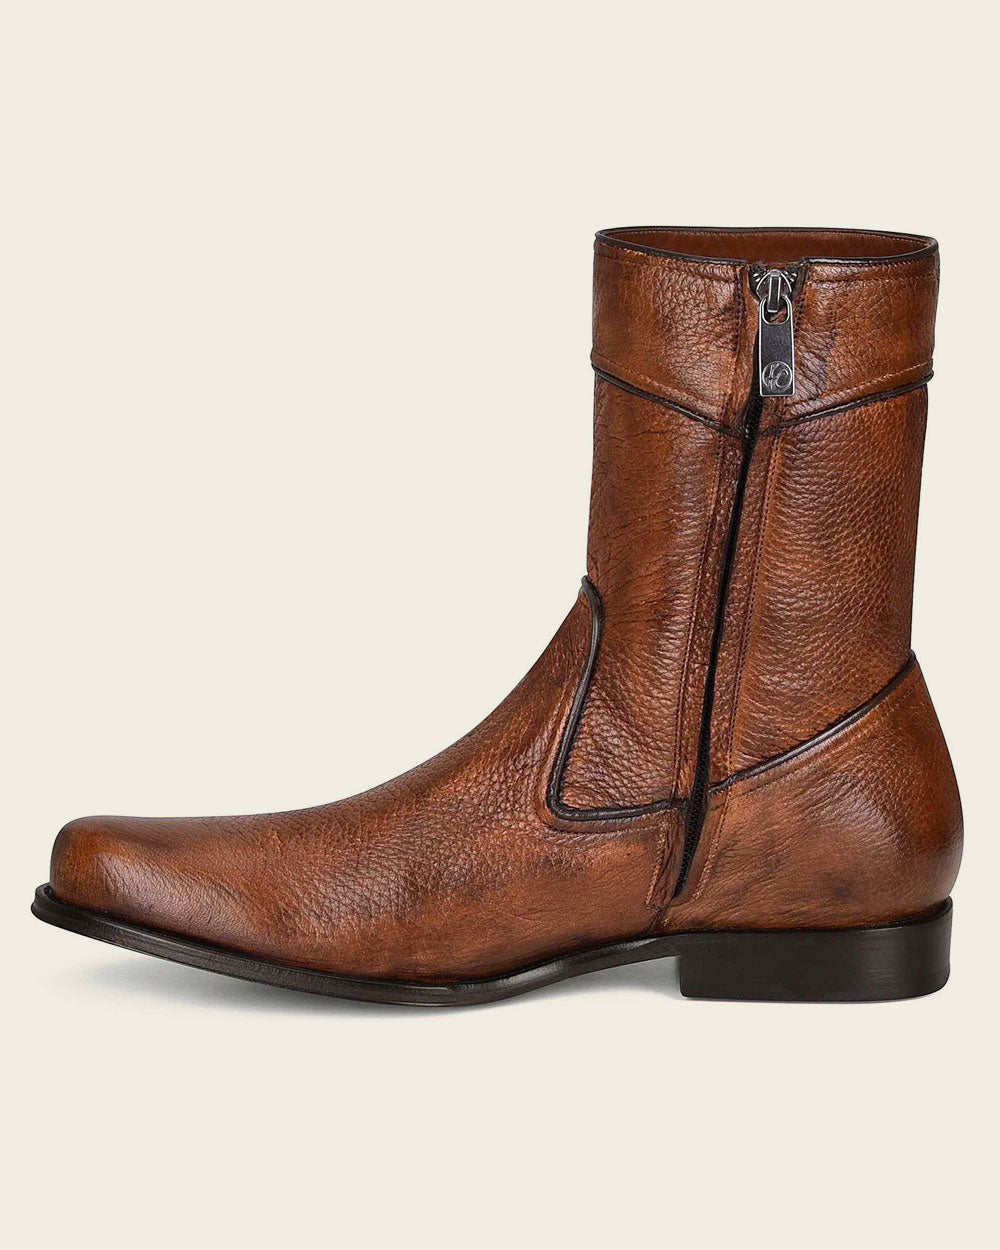 Premium leather:&nbsp;Our boots are carefully crafted from genuine deer leather, known for its unique softness and elasticity. This leather type allows your footwear to adapt to the unique contours of your feet, ensuring a unique fit for optimum comfort.